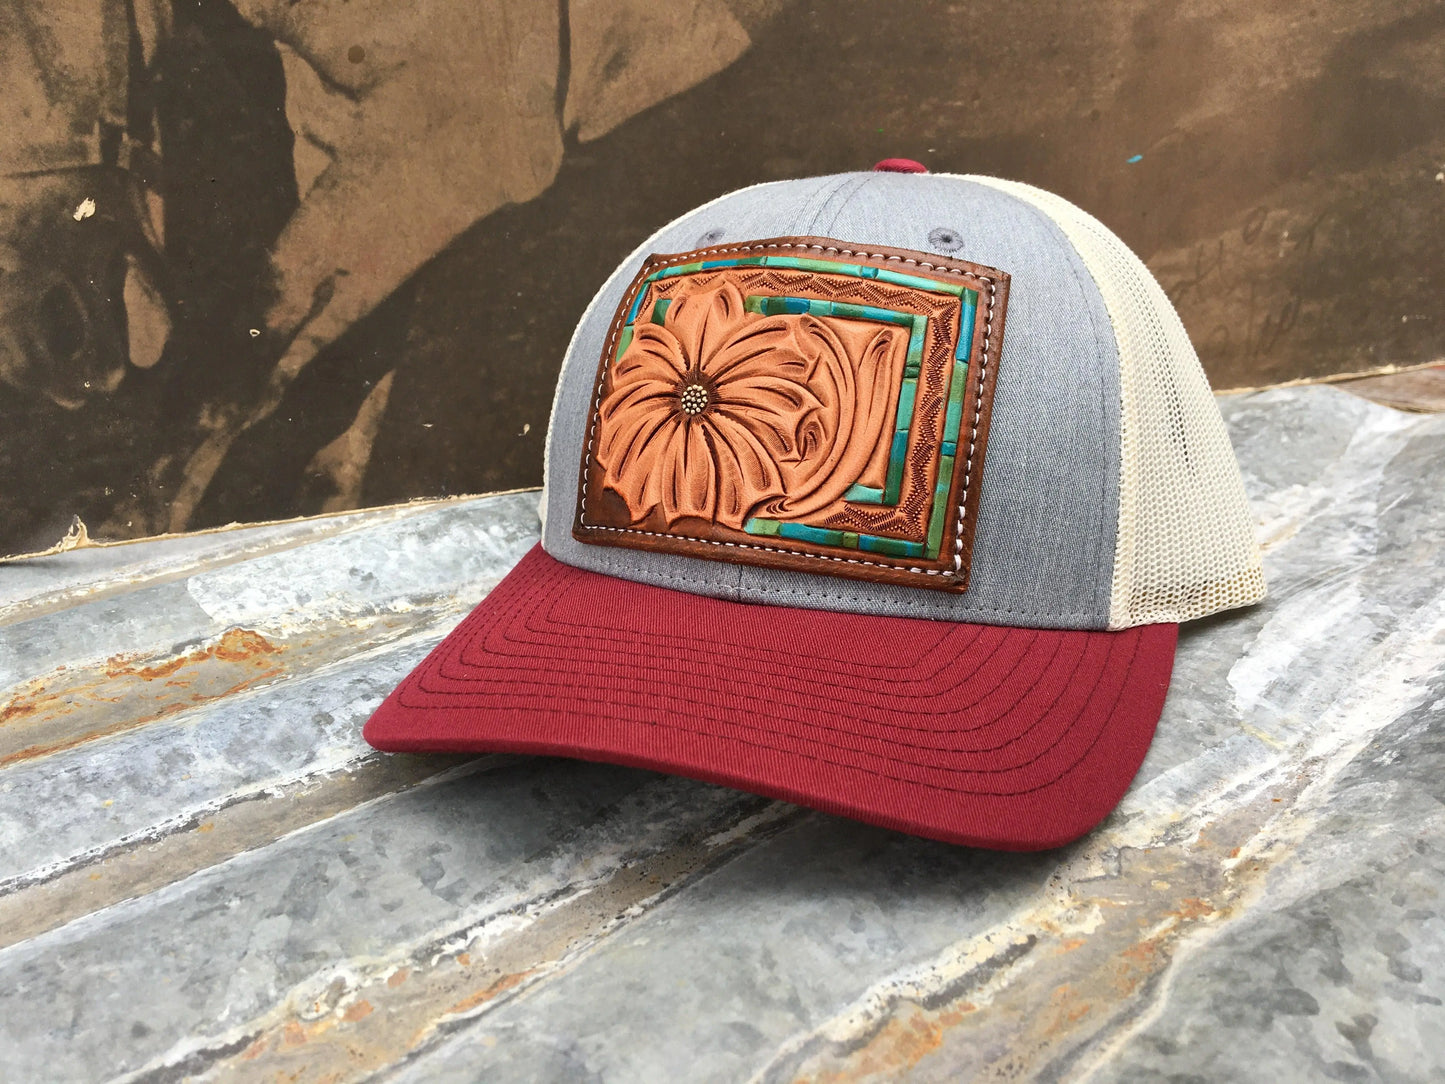 Handtooled leather patch cap The Daisy Handtooled Leather Patch Cap with Turquoise Southwestern Border The Rodeo Rose Handtooled leather patch cap cowgirl hat cowboy hat 